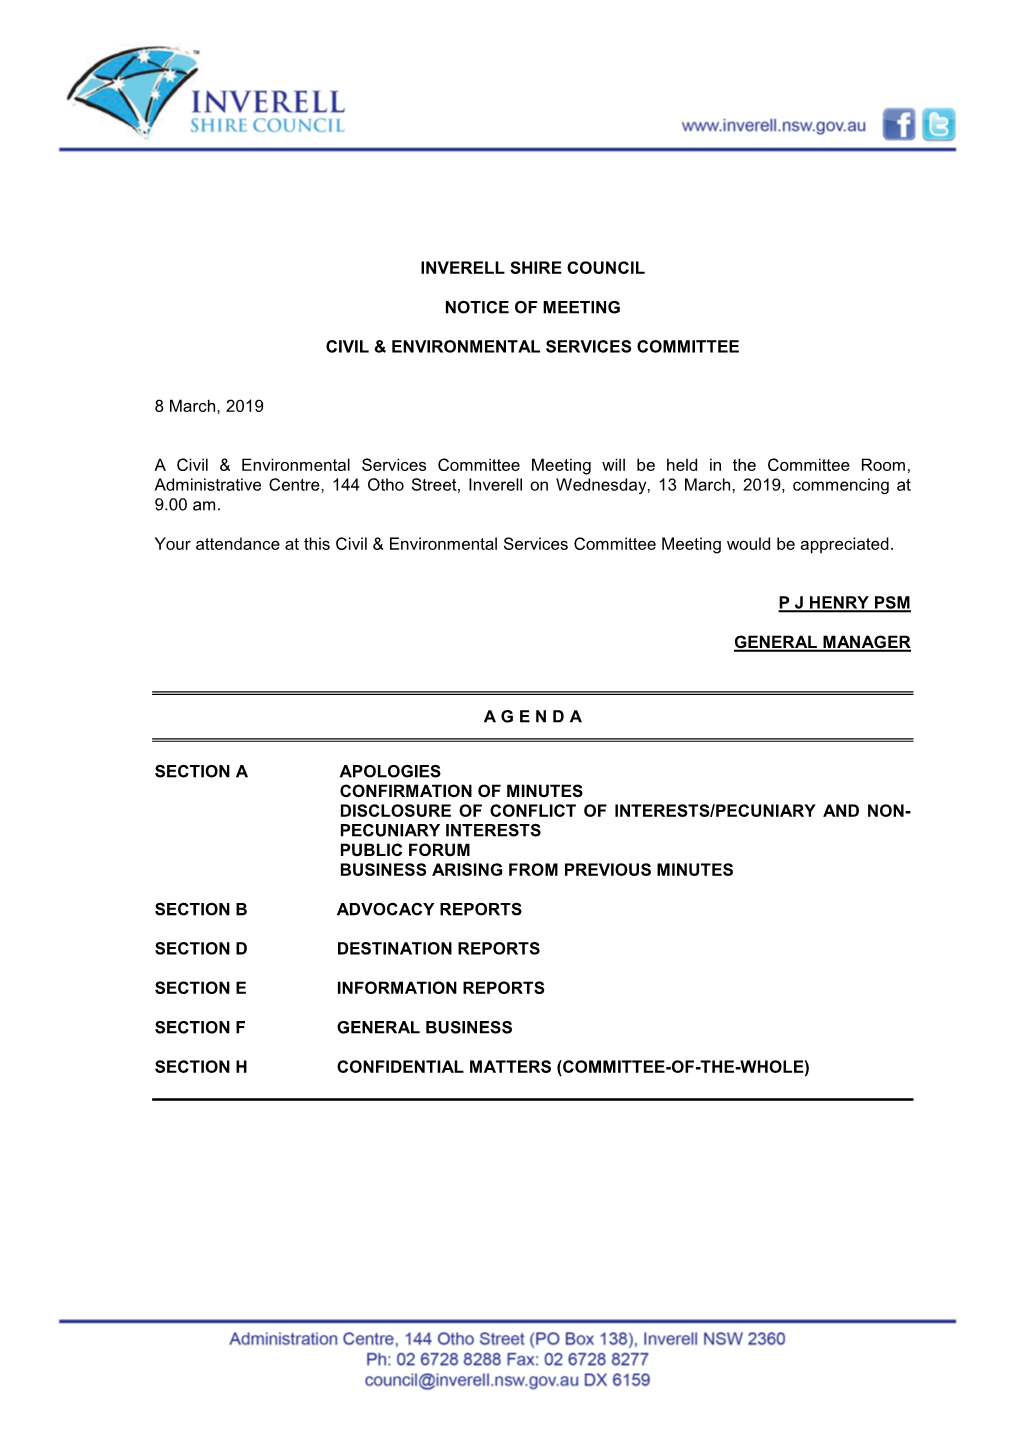 Inverell Shire Council Notice of Meeting Civil